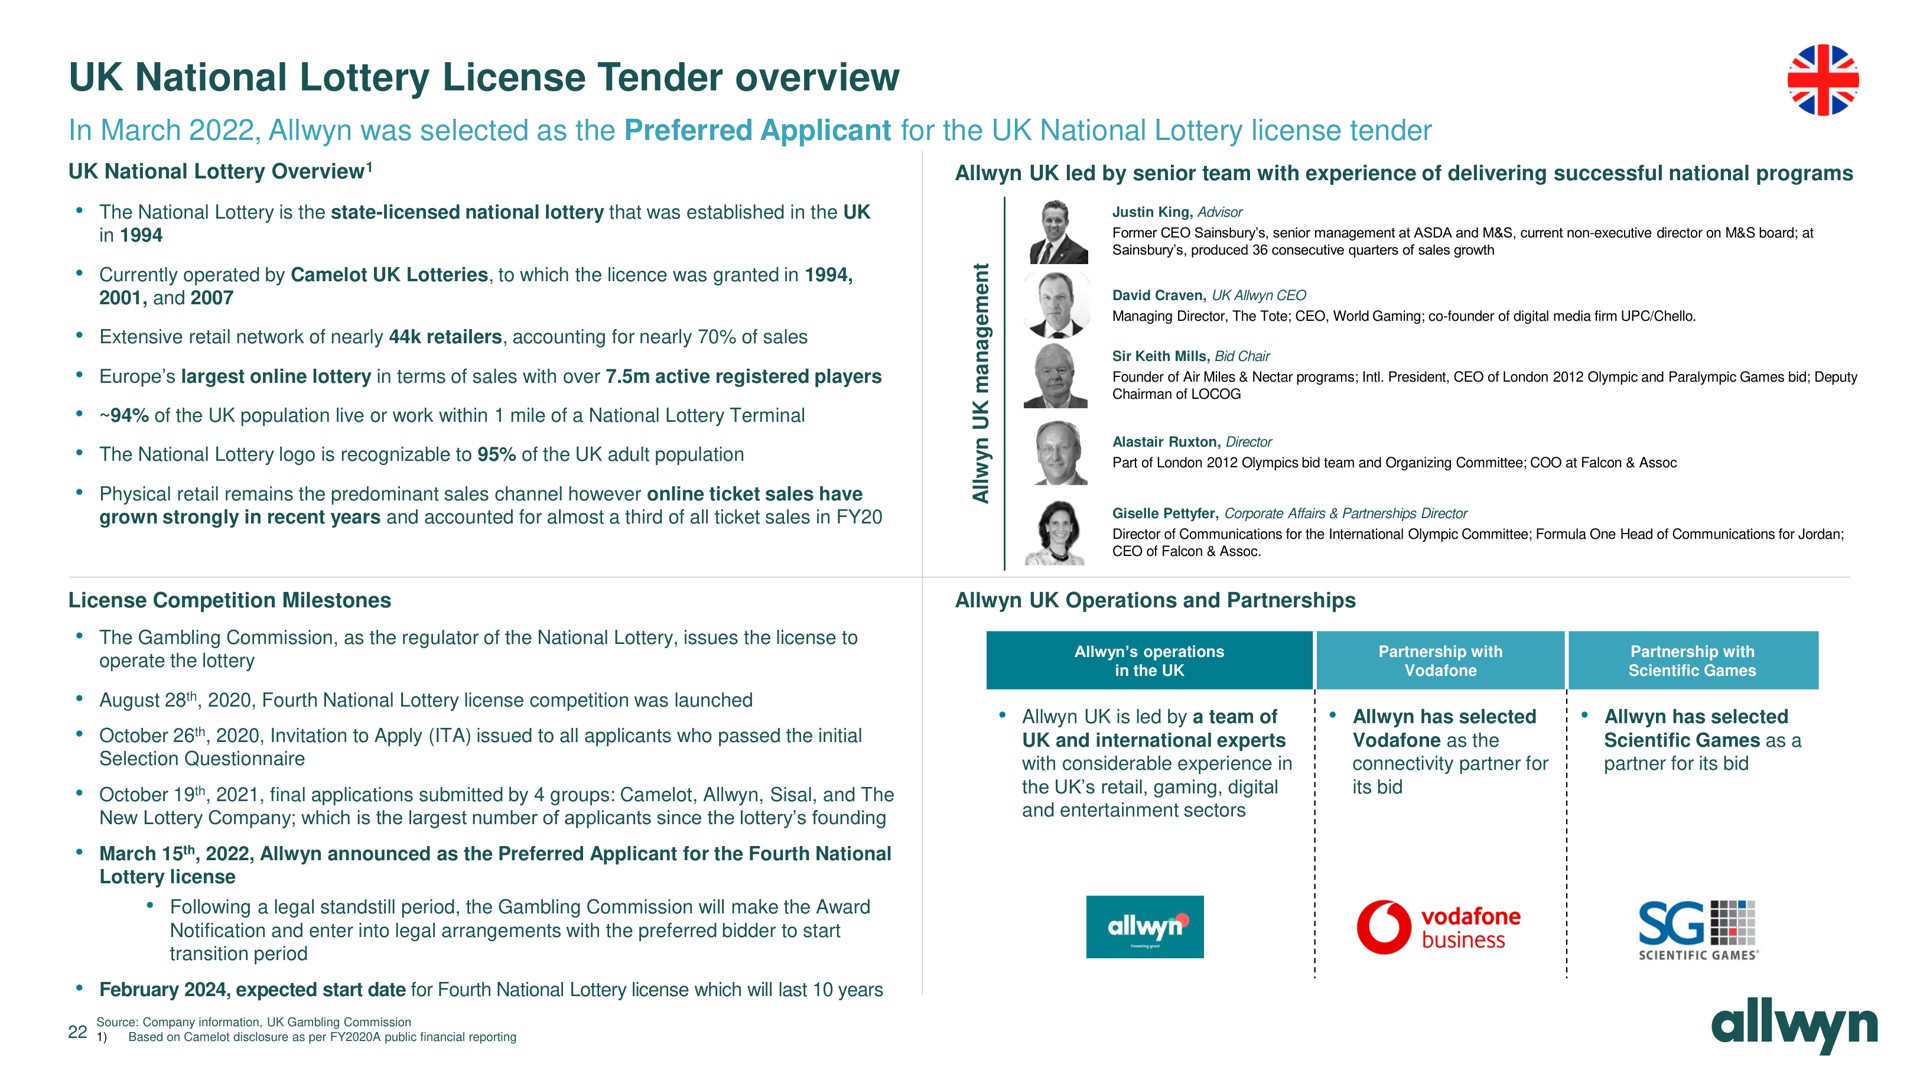 national lottery license tender overview in march was selected as the preferred applicant for the national lottery license tender | Allwyn